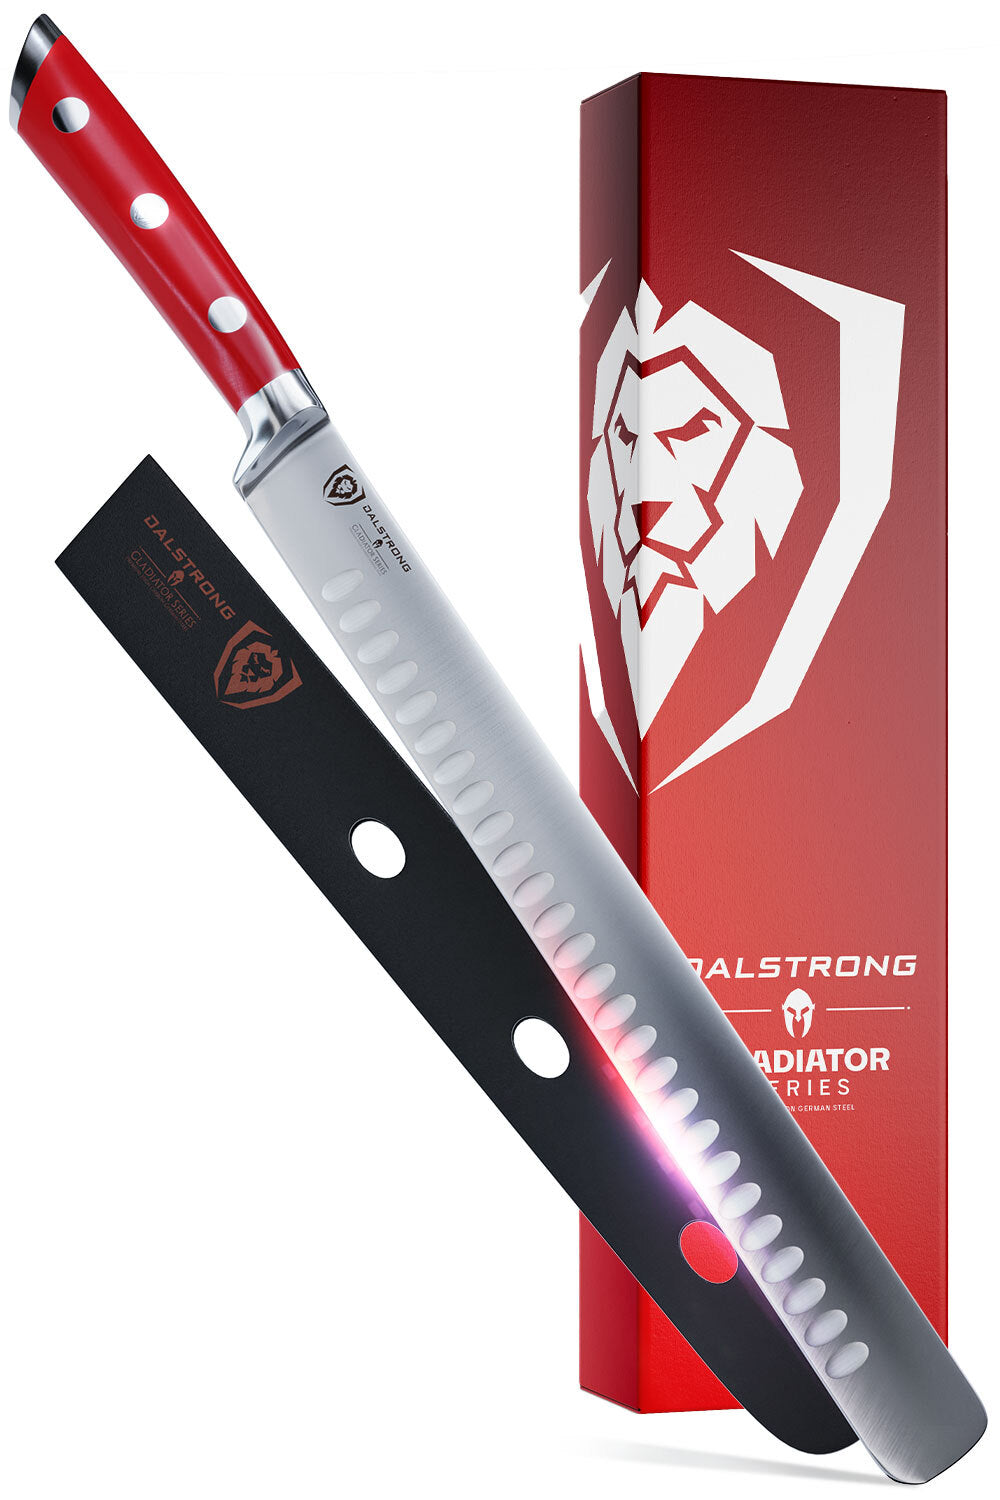 Dalstrong gladiator series 12 inch slicer knife with red handle in front of it's premium packaging.